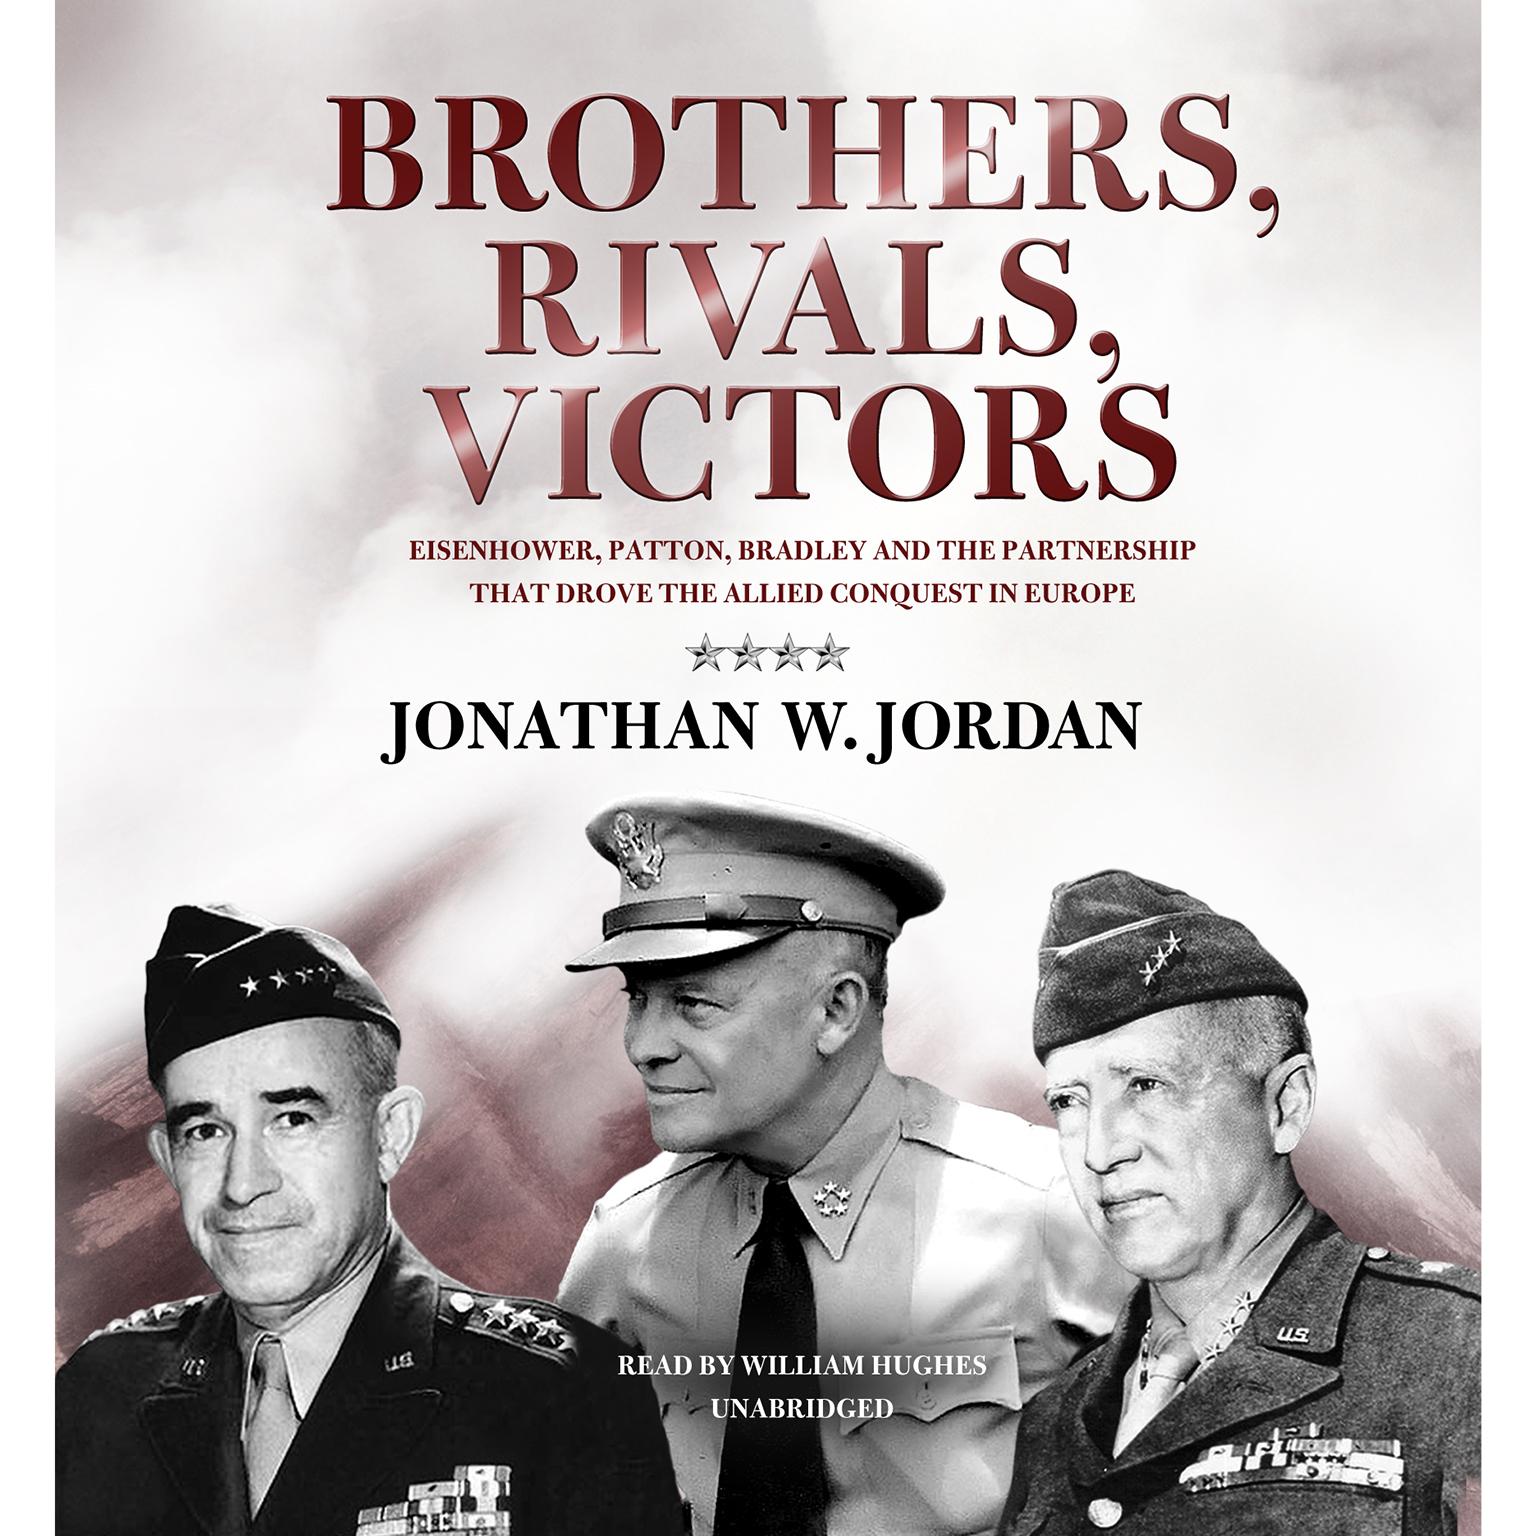 Brothers, Rivals, Victors: Eisenhower, Patton, Bradley, and the Partnership That Drove the Allied Conquest in Europe Audiobook, by Jonathan W. Jordan